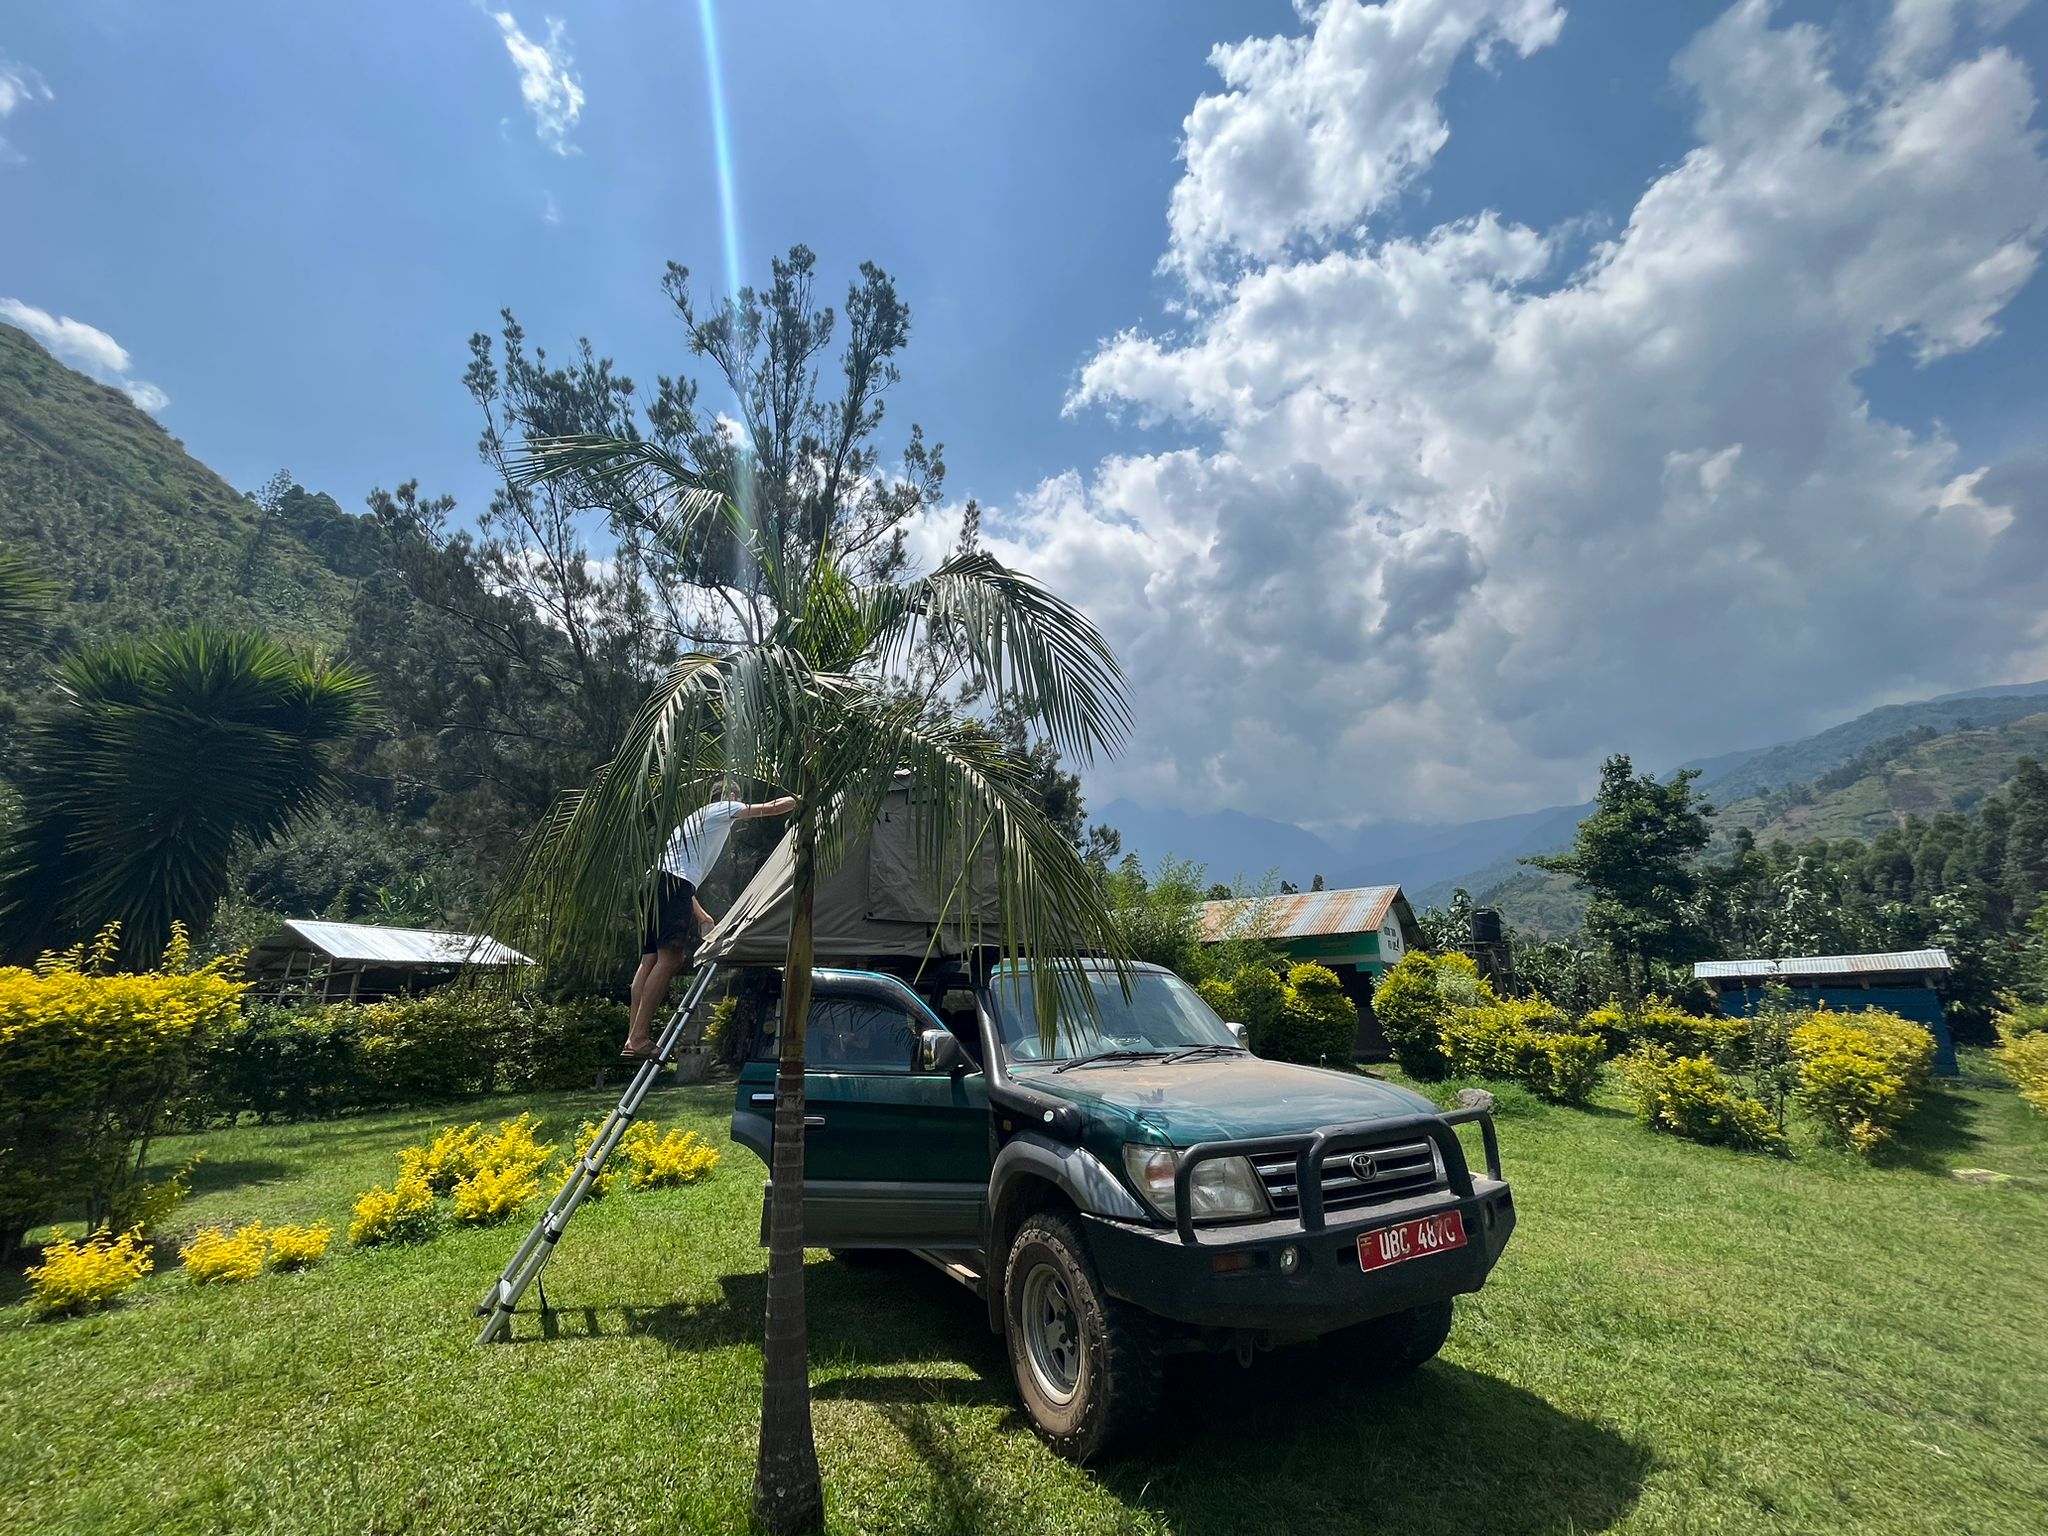 4x4landcruiser with rooftop tent